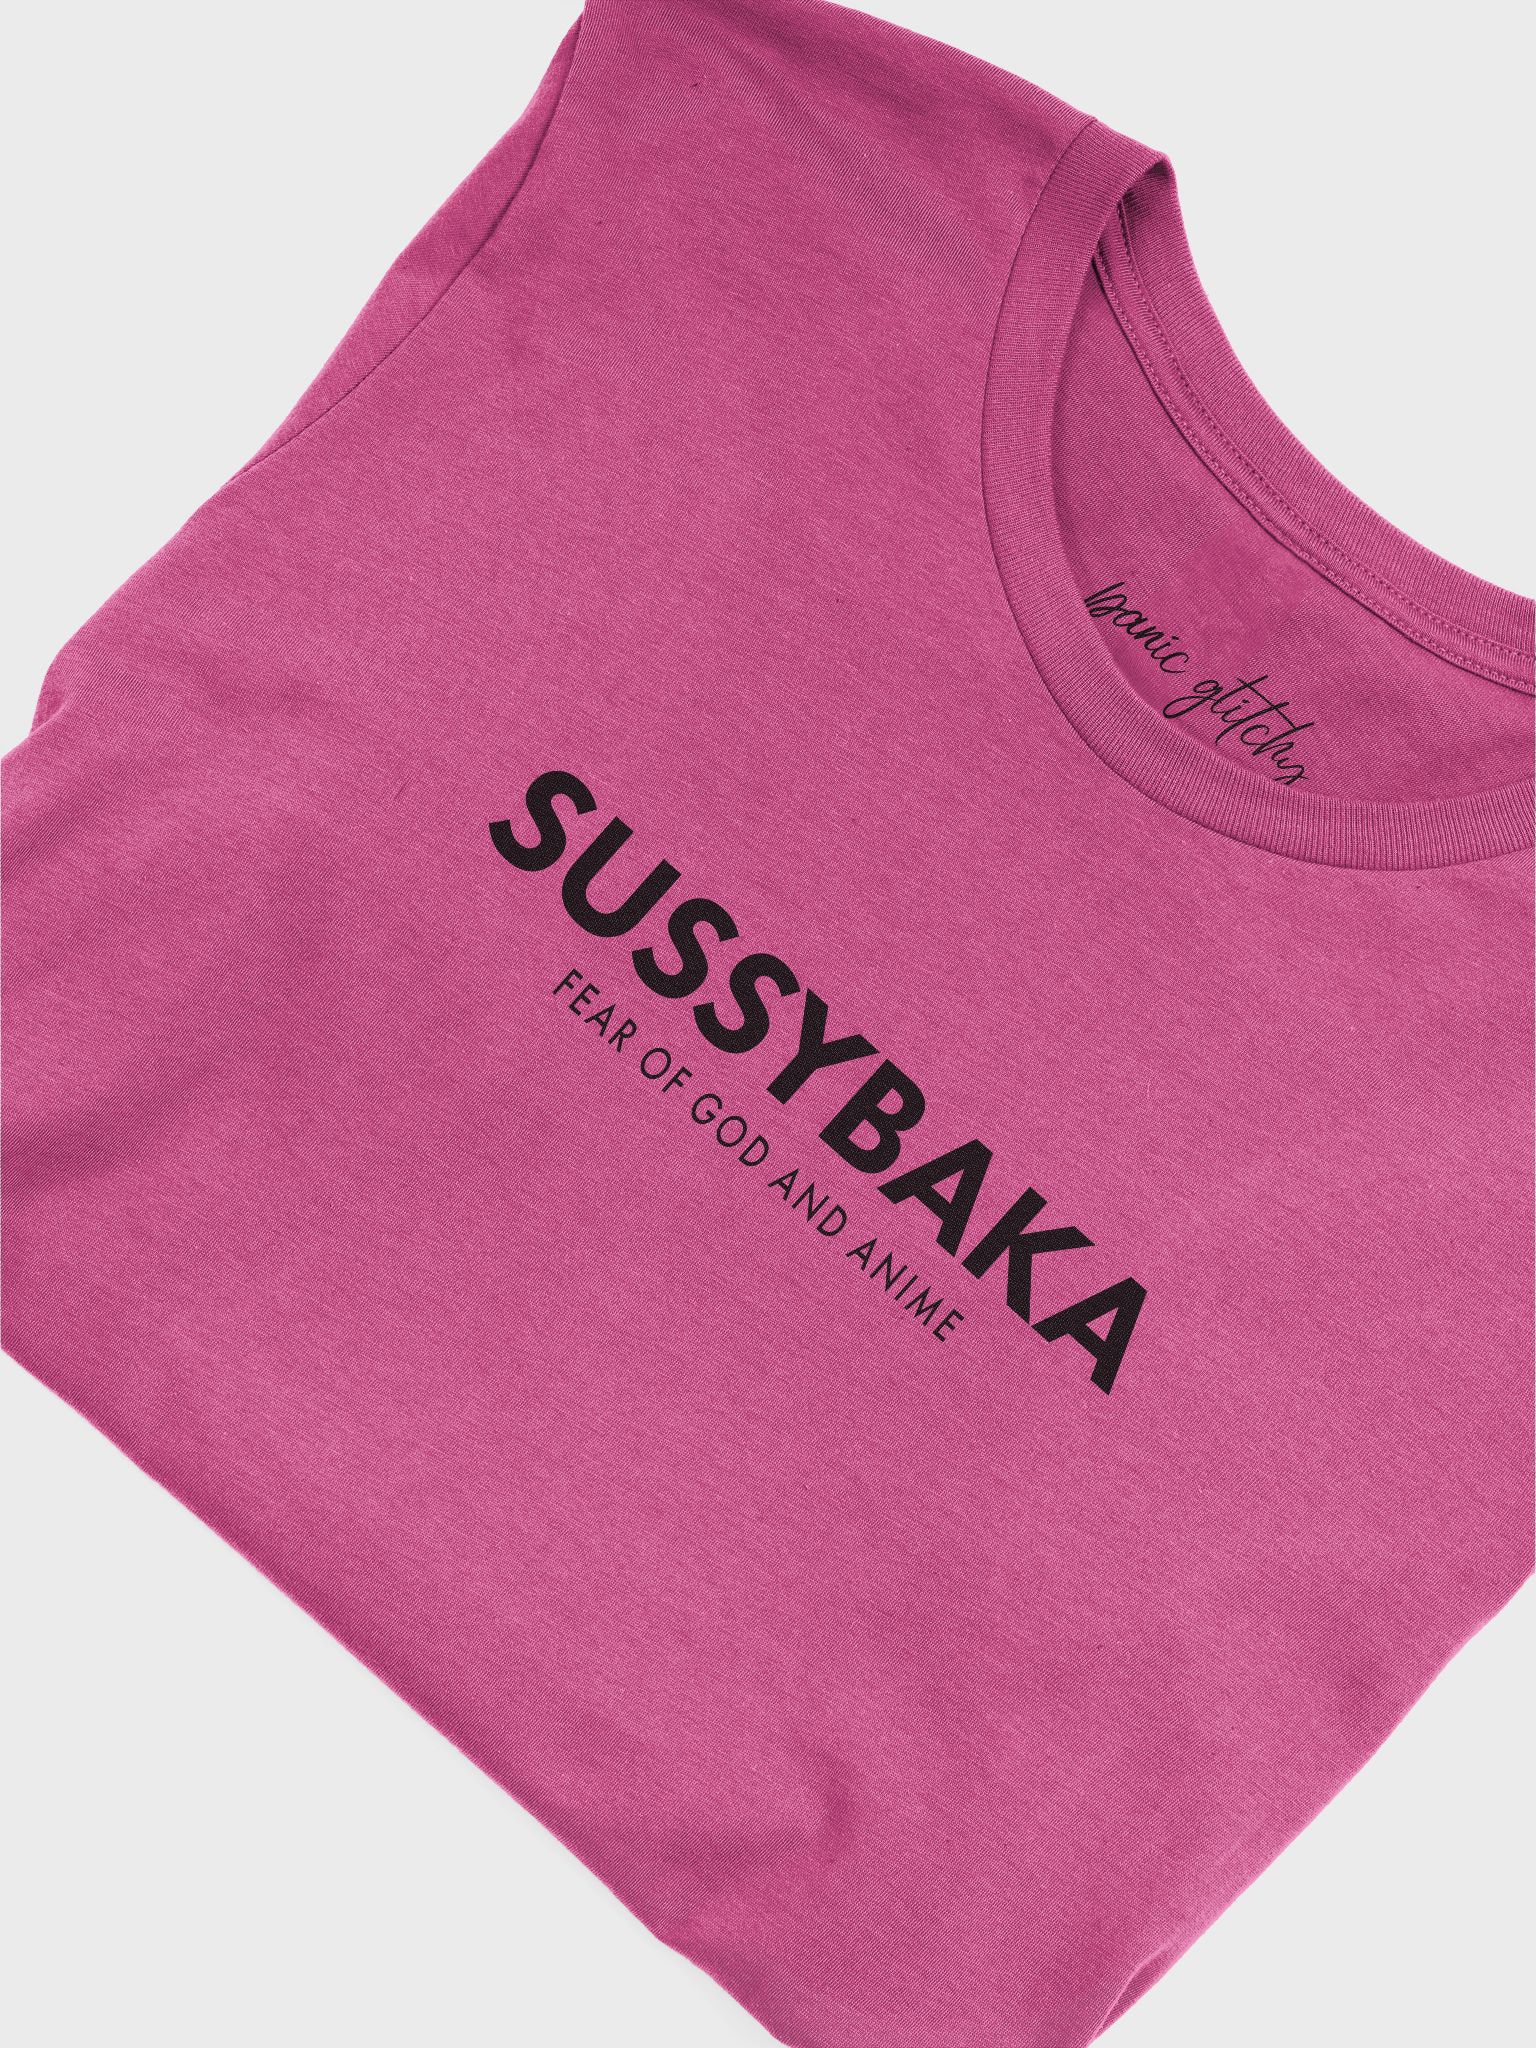 Sussy Baka Hypebeast Collection